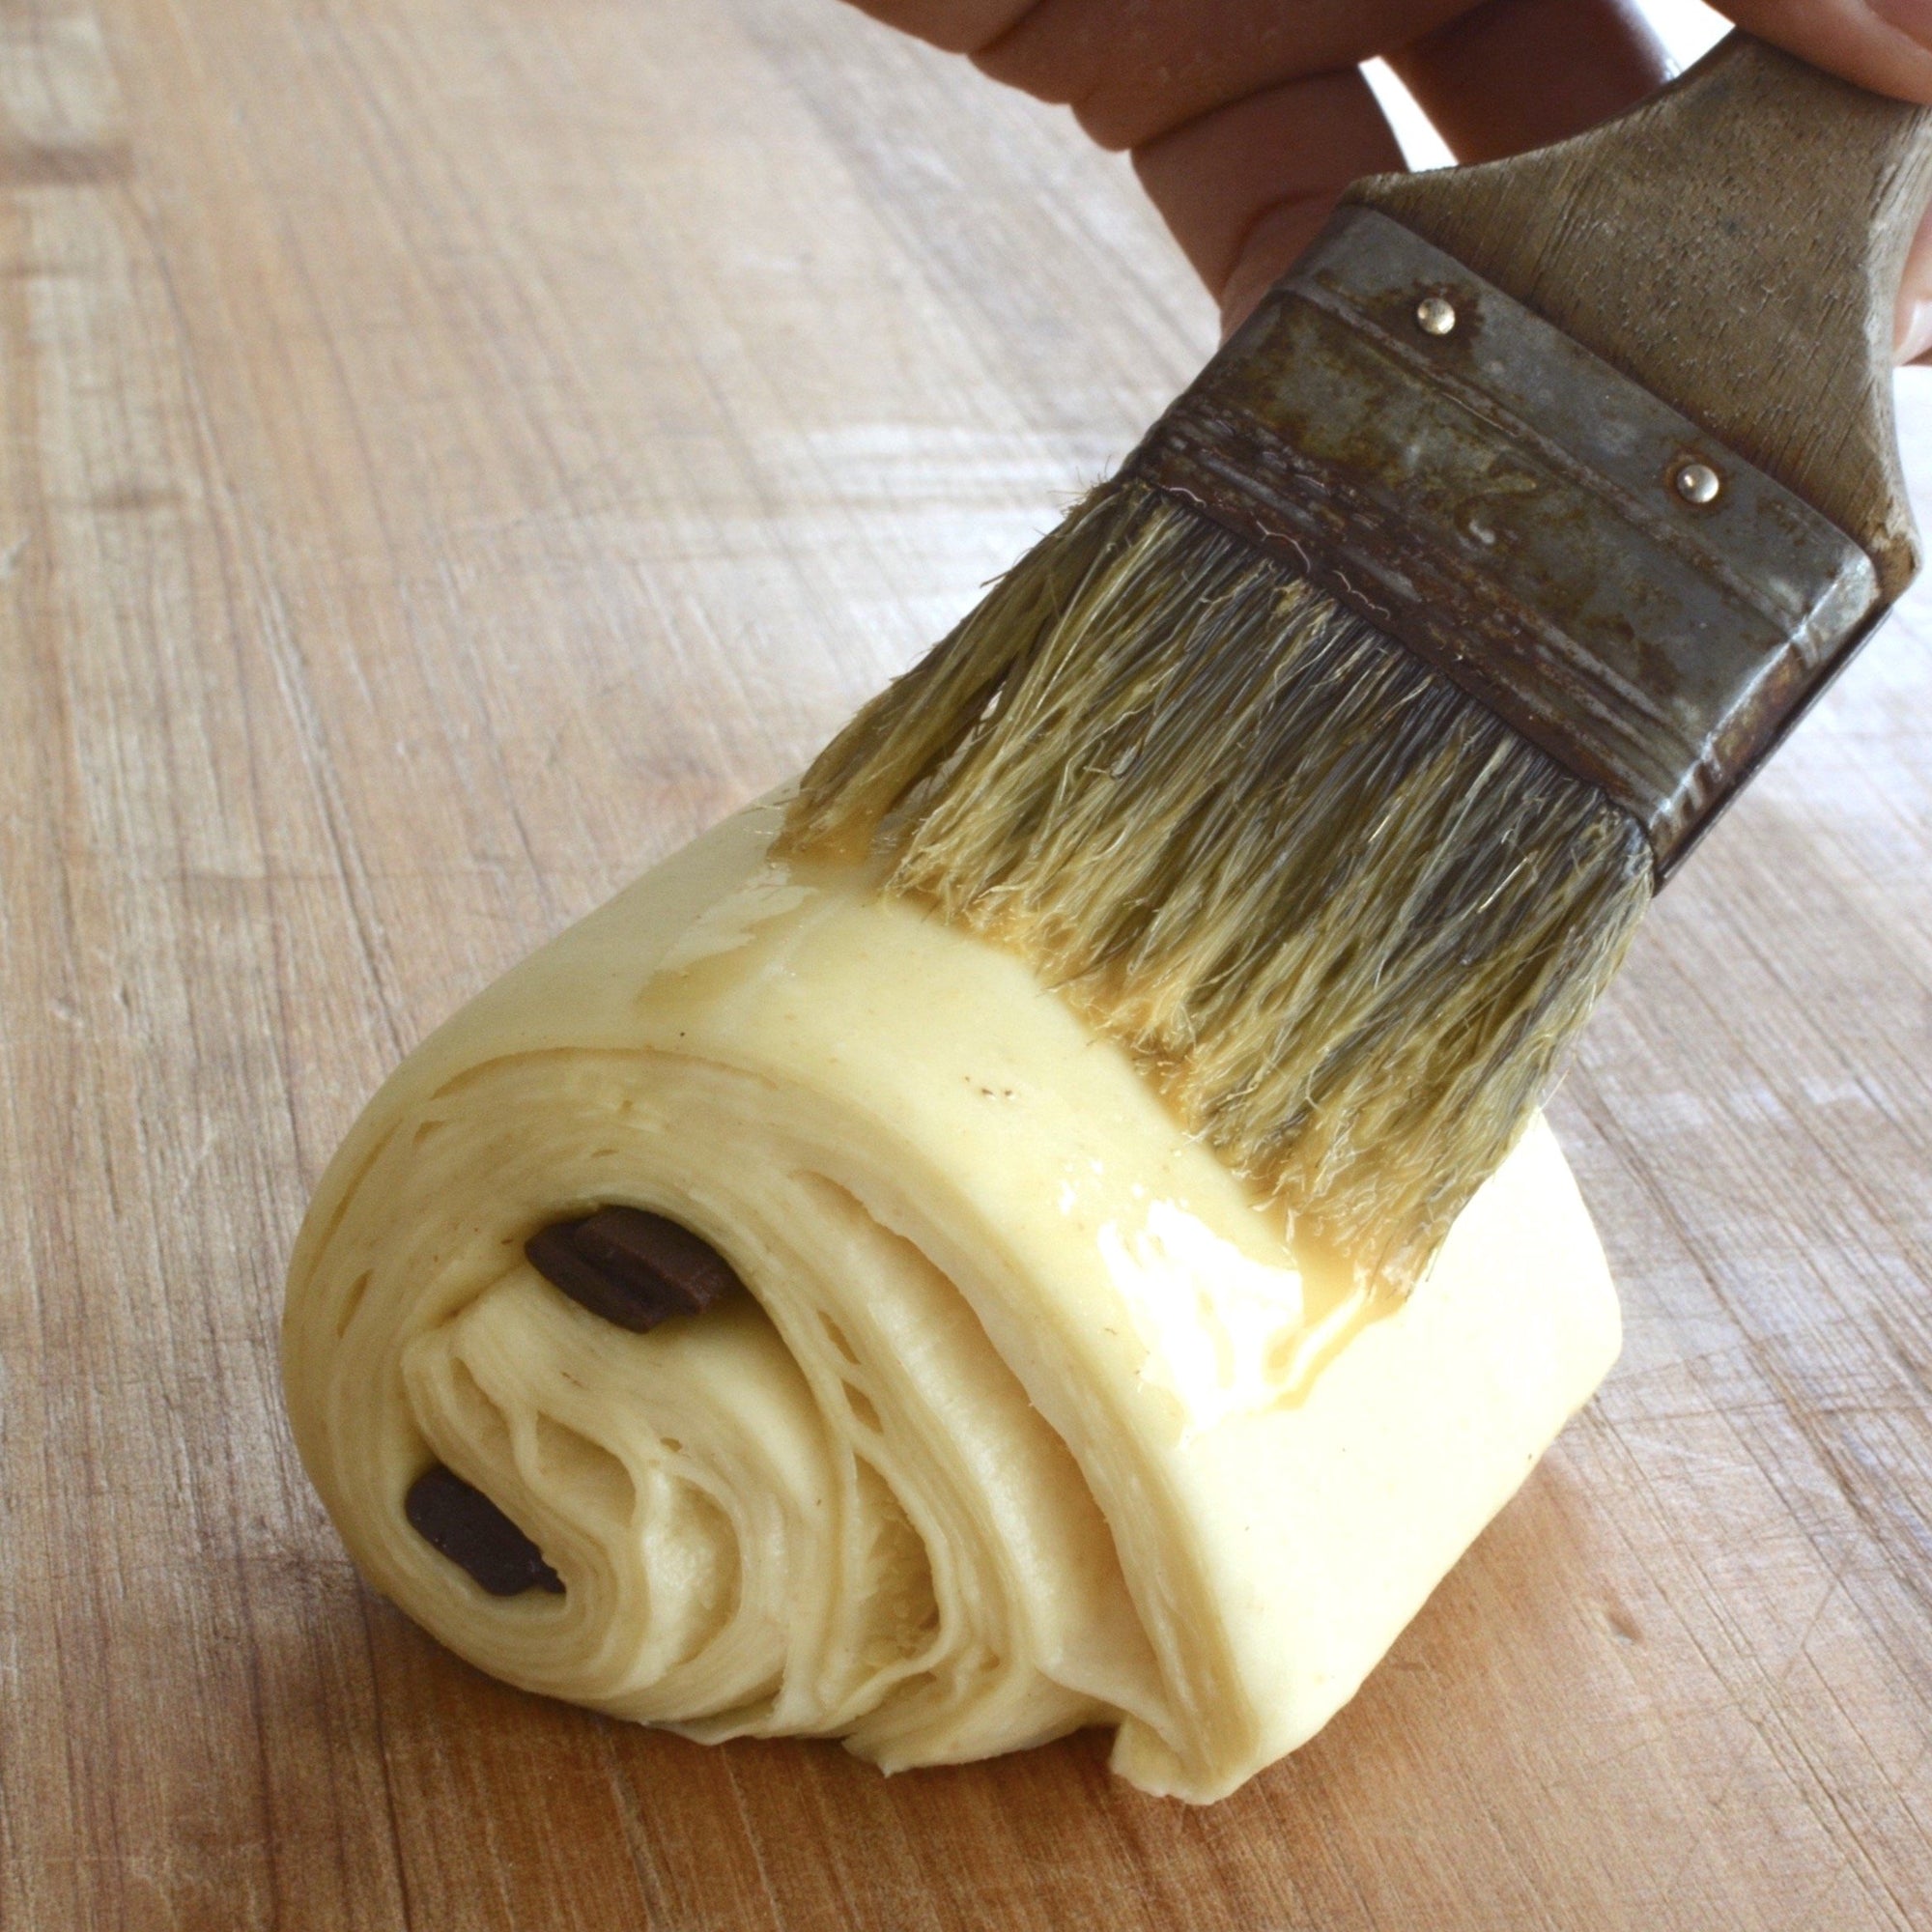 a pain au chocolat that is being egg washed using a paintbrush